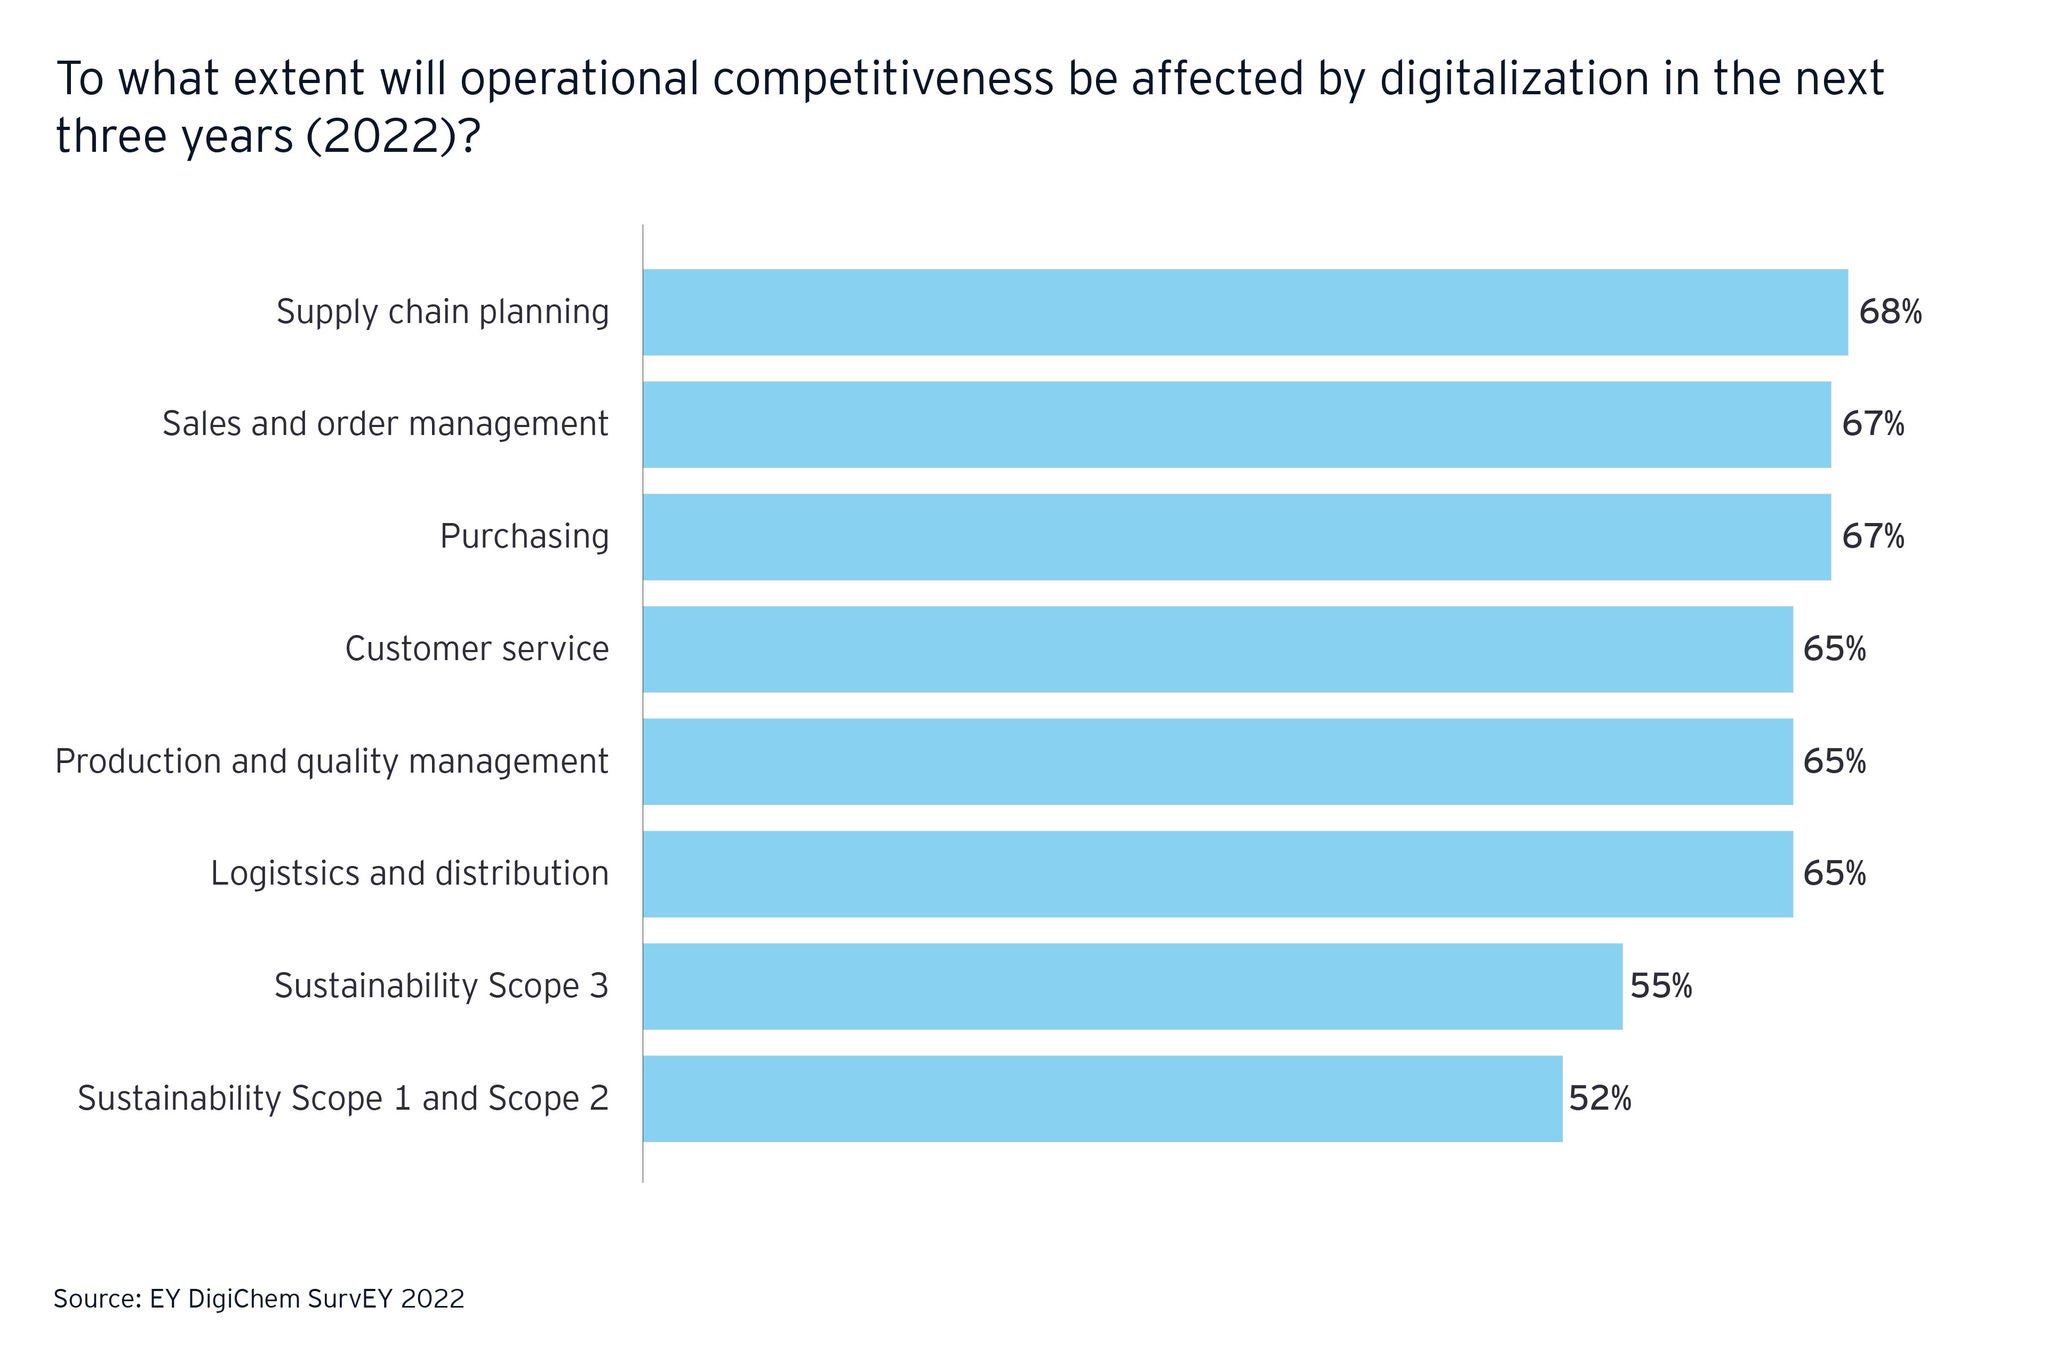 Effects of digitalization on operational competitiveness